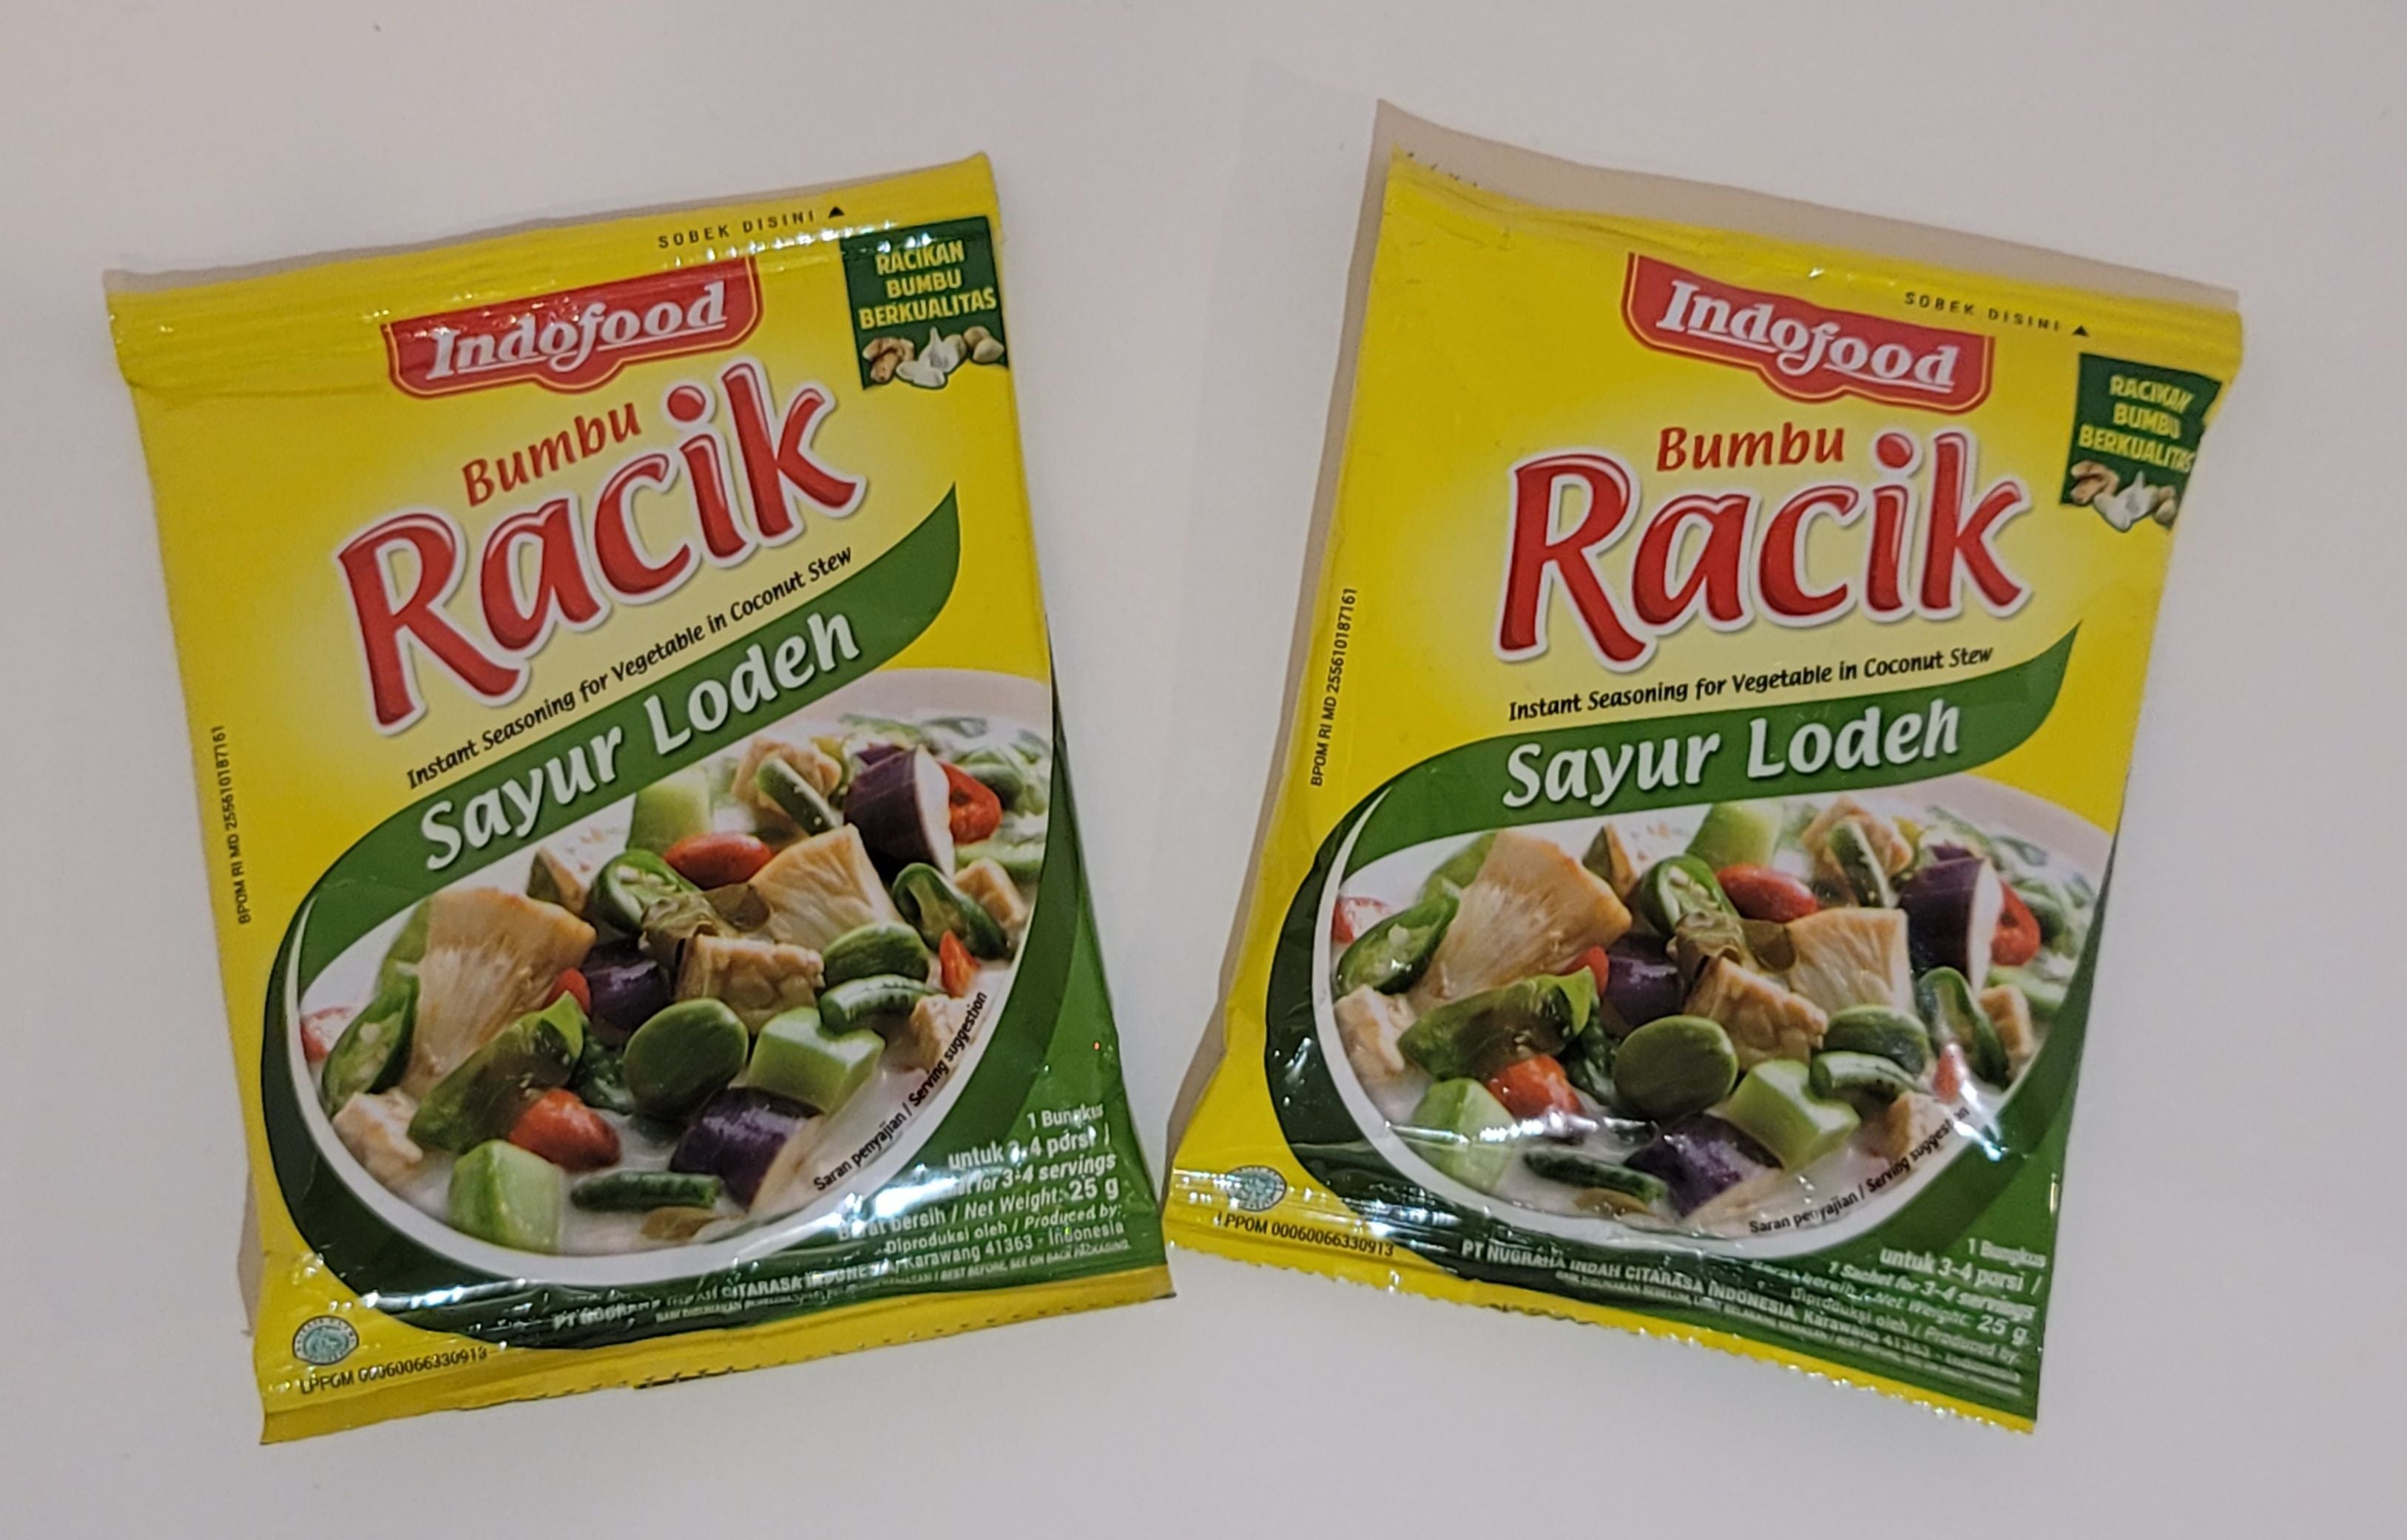 Indofood Racik Sayur Lodeh (Instant Seasoning for Vegetable in Coconut Soup)